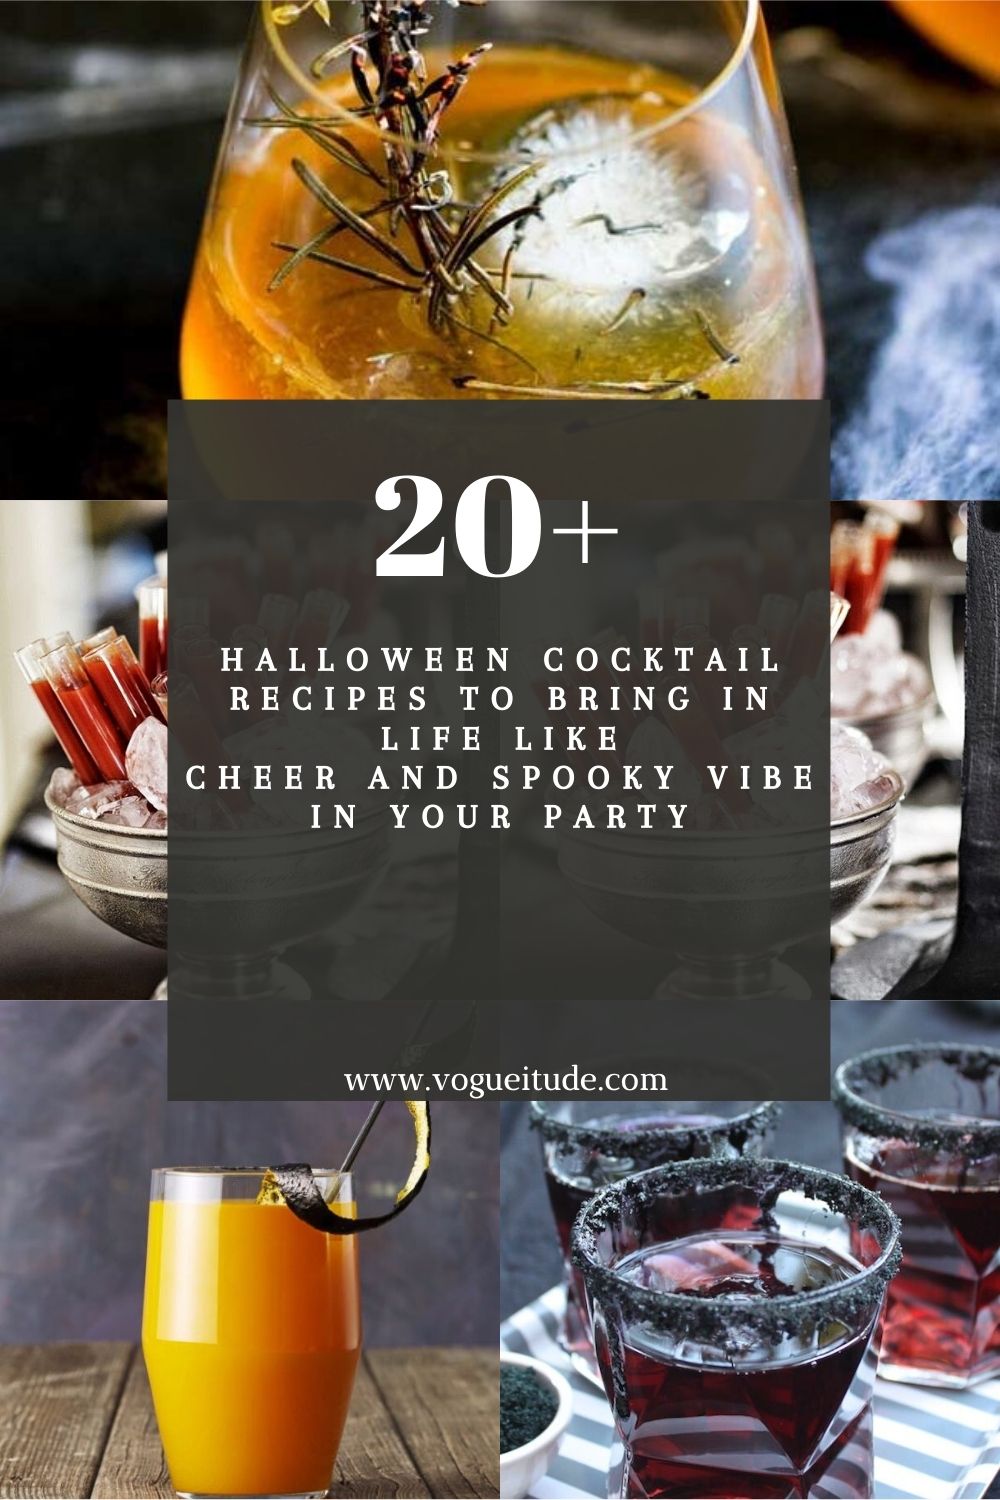 Halloween Cocktail Recipes to bring in Life like cheer and spooky vibe in your party